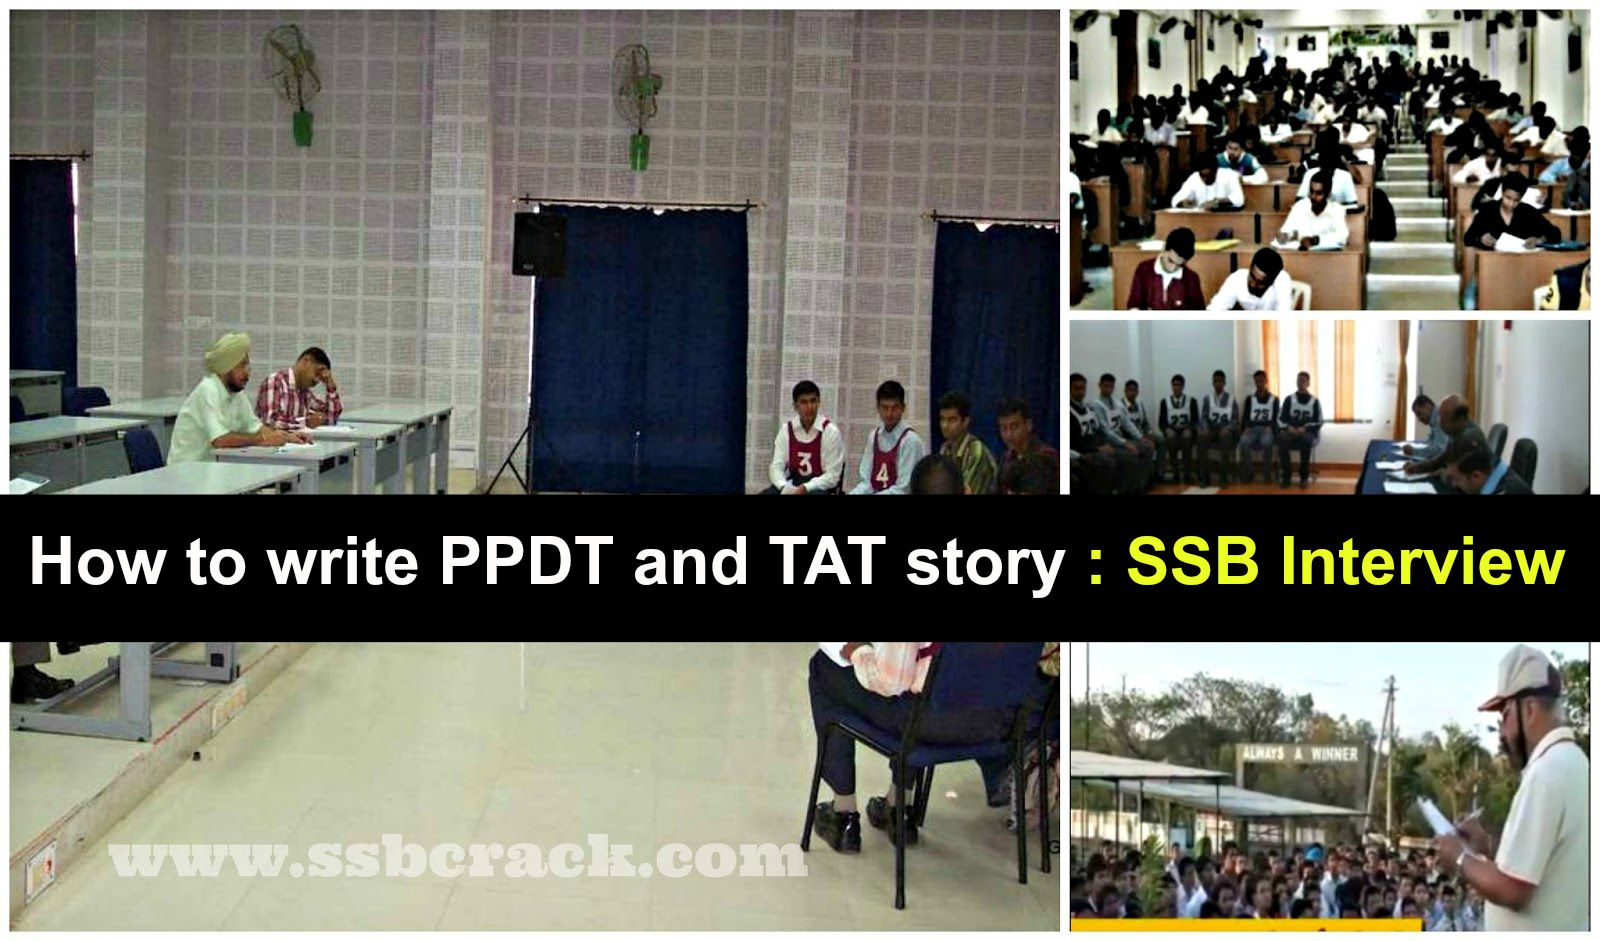 How to write PPDT and TAT story